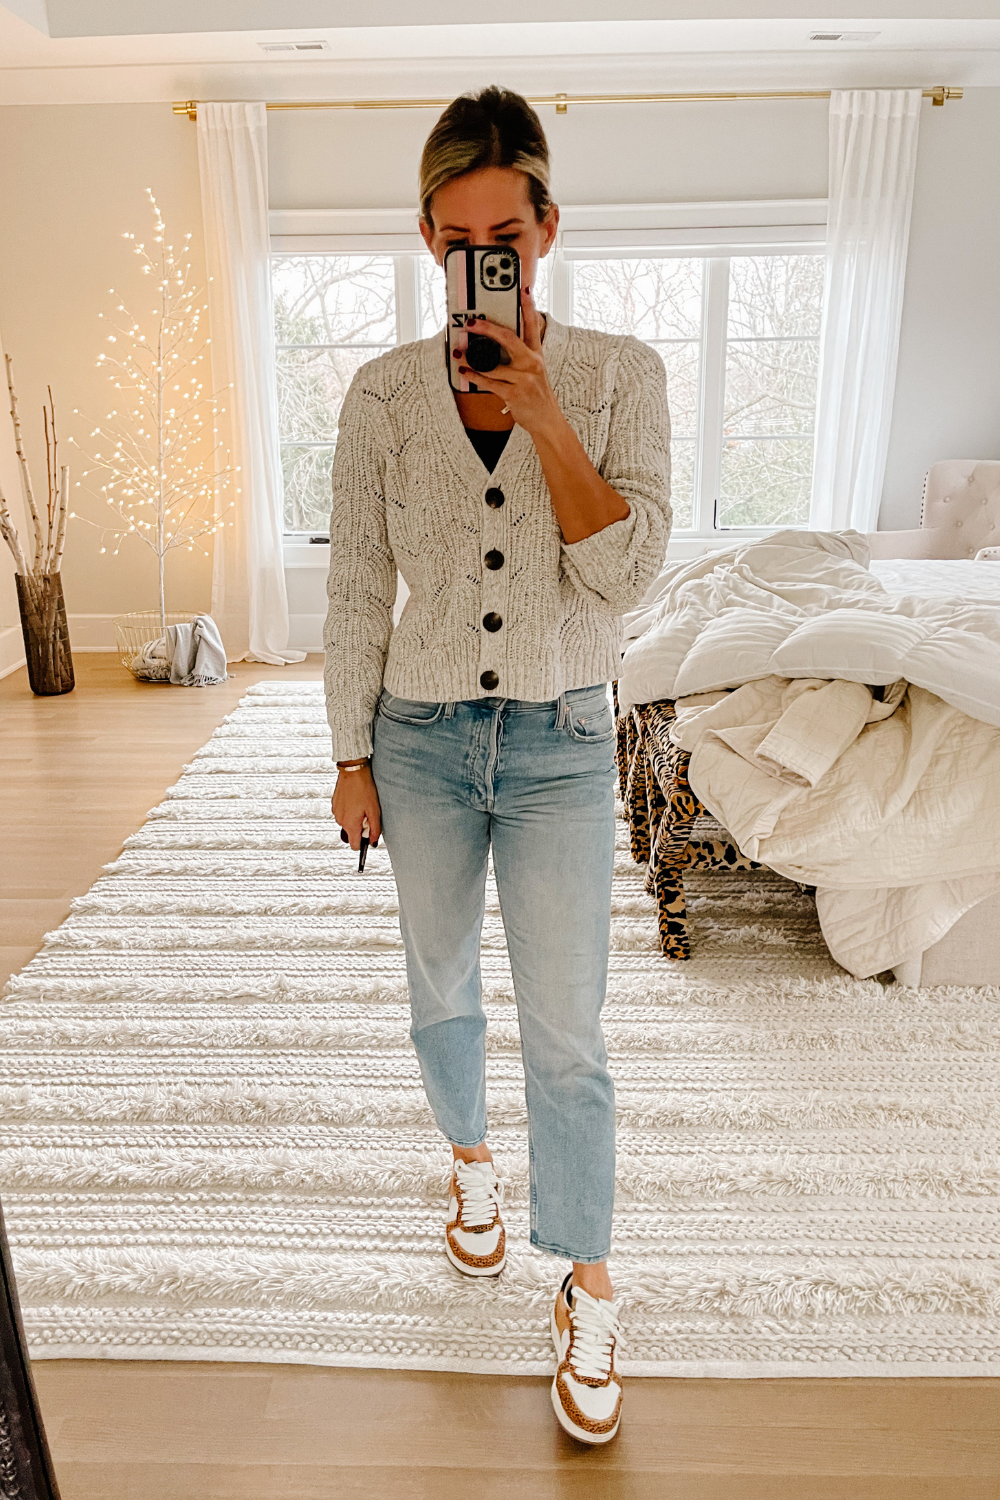 Suzanne wearing a cardigan, jeans, and sneakers